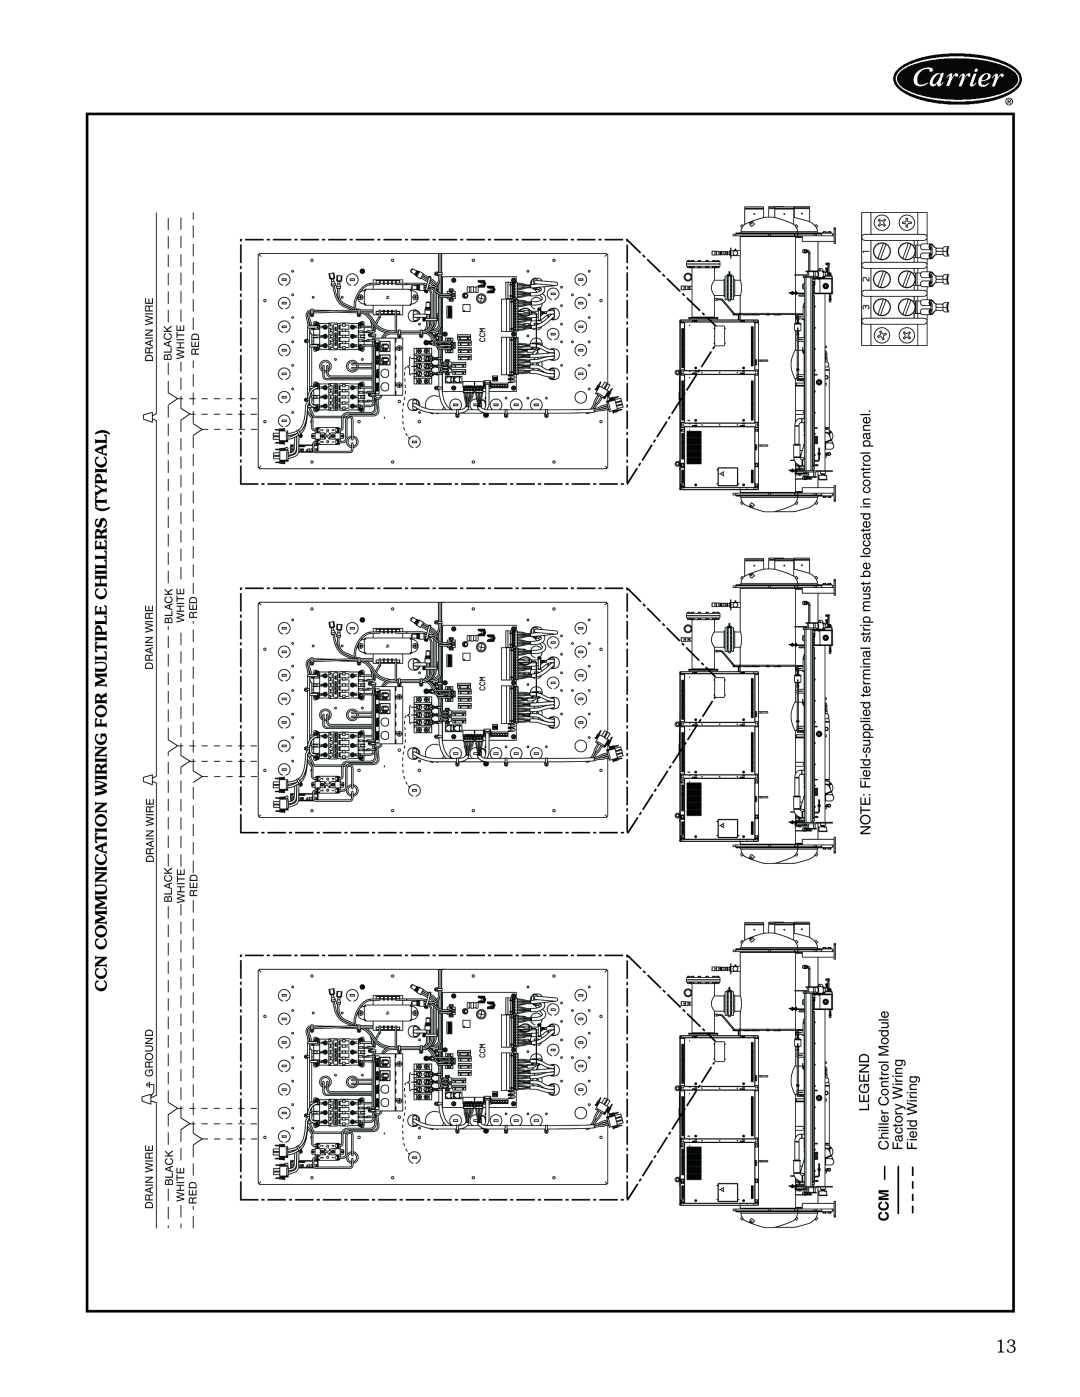 Carrier 23XRV manual Ccn Communication Wiring For Multiple Chillers Typical 